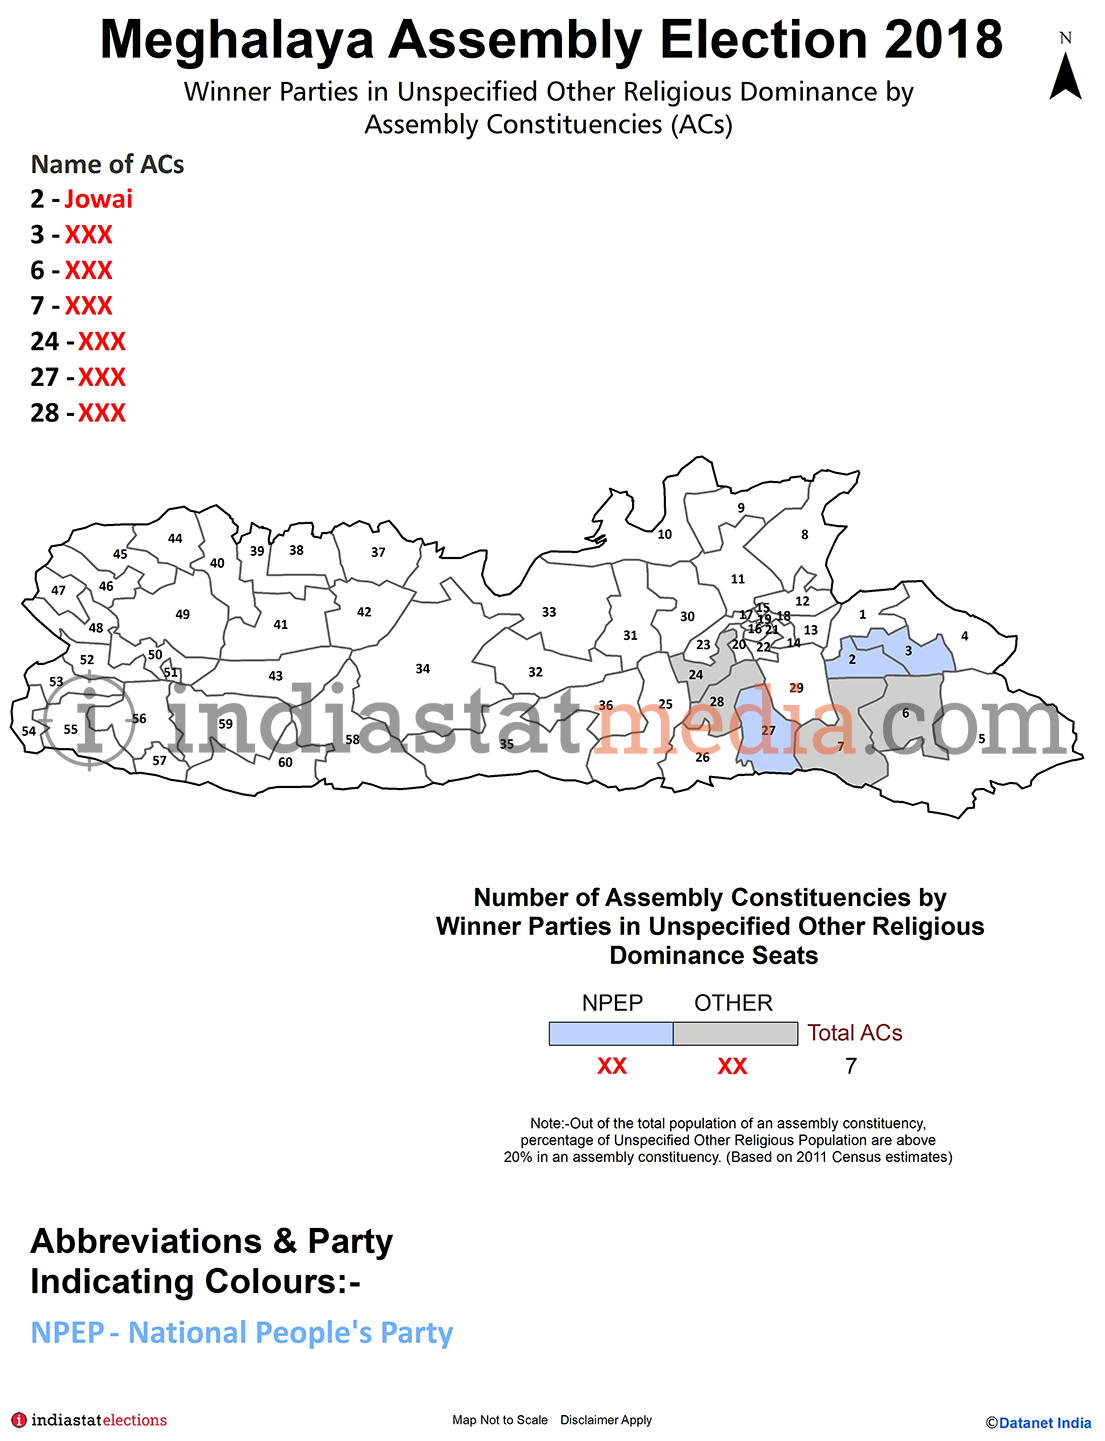 Winner Parties in Unspecified Other Religious Dominance by Constituencies in Meghalaya (Assembly Election - 2018)